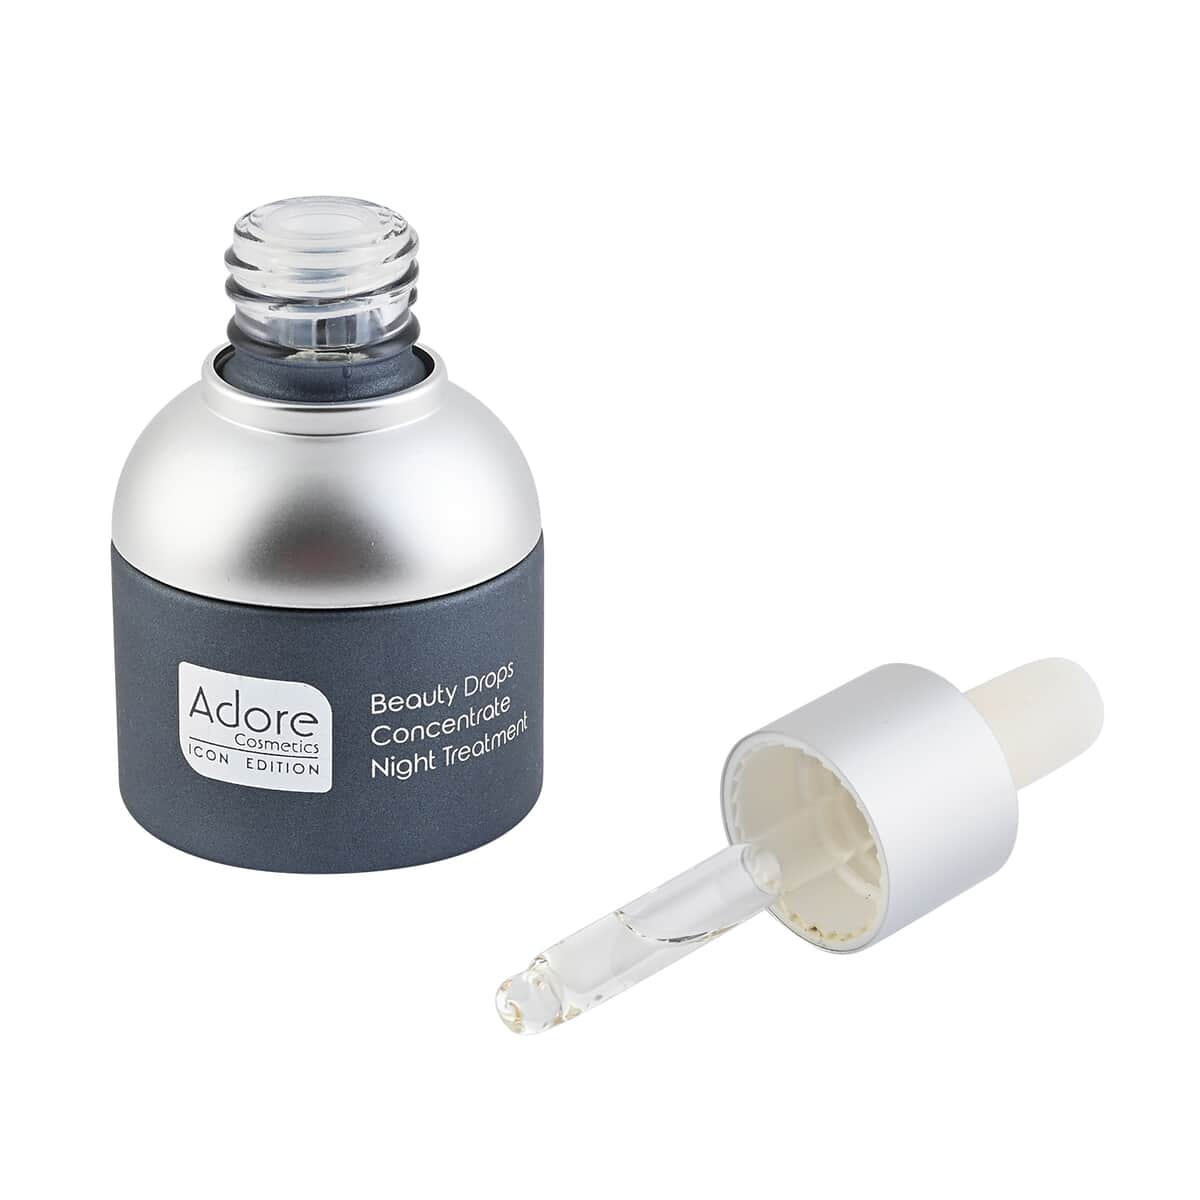 Adore Beauty Drops - Concentrate Night Treatment 30ml/1oz image number 4